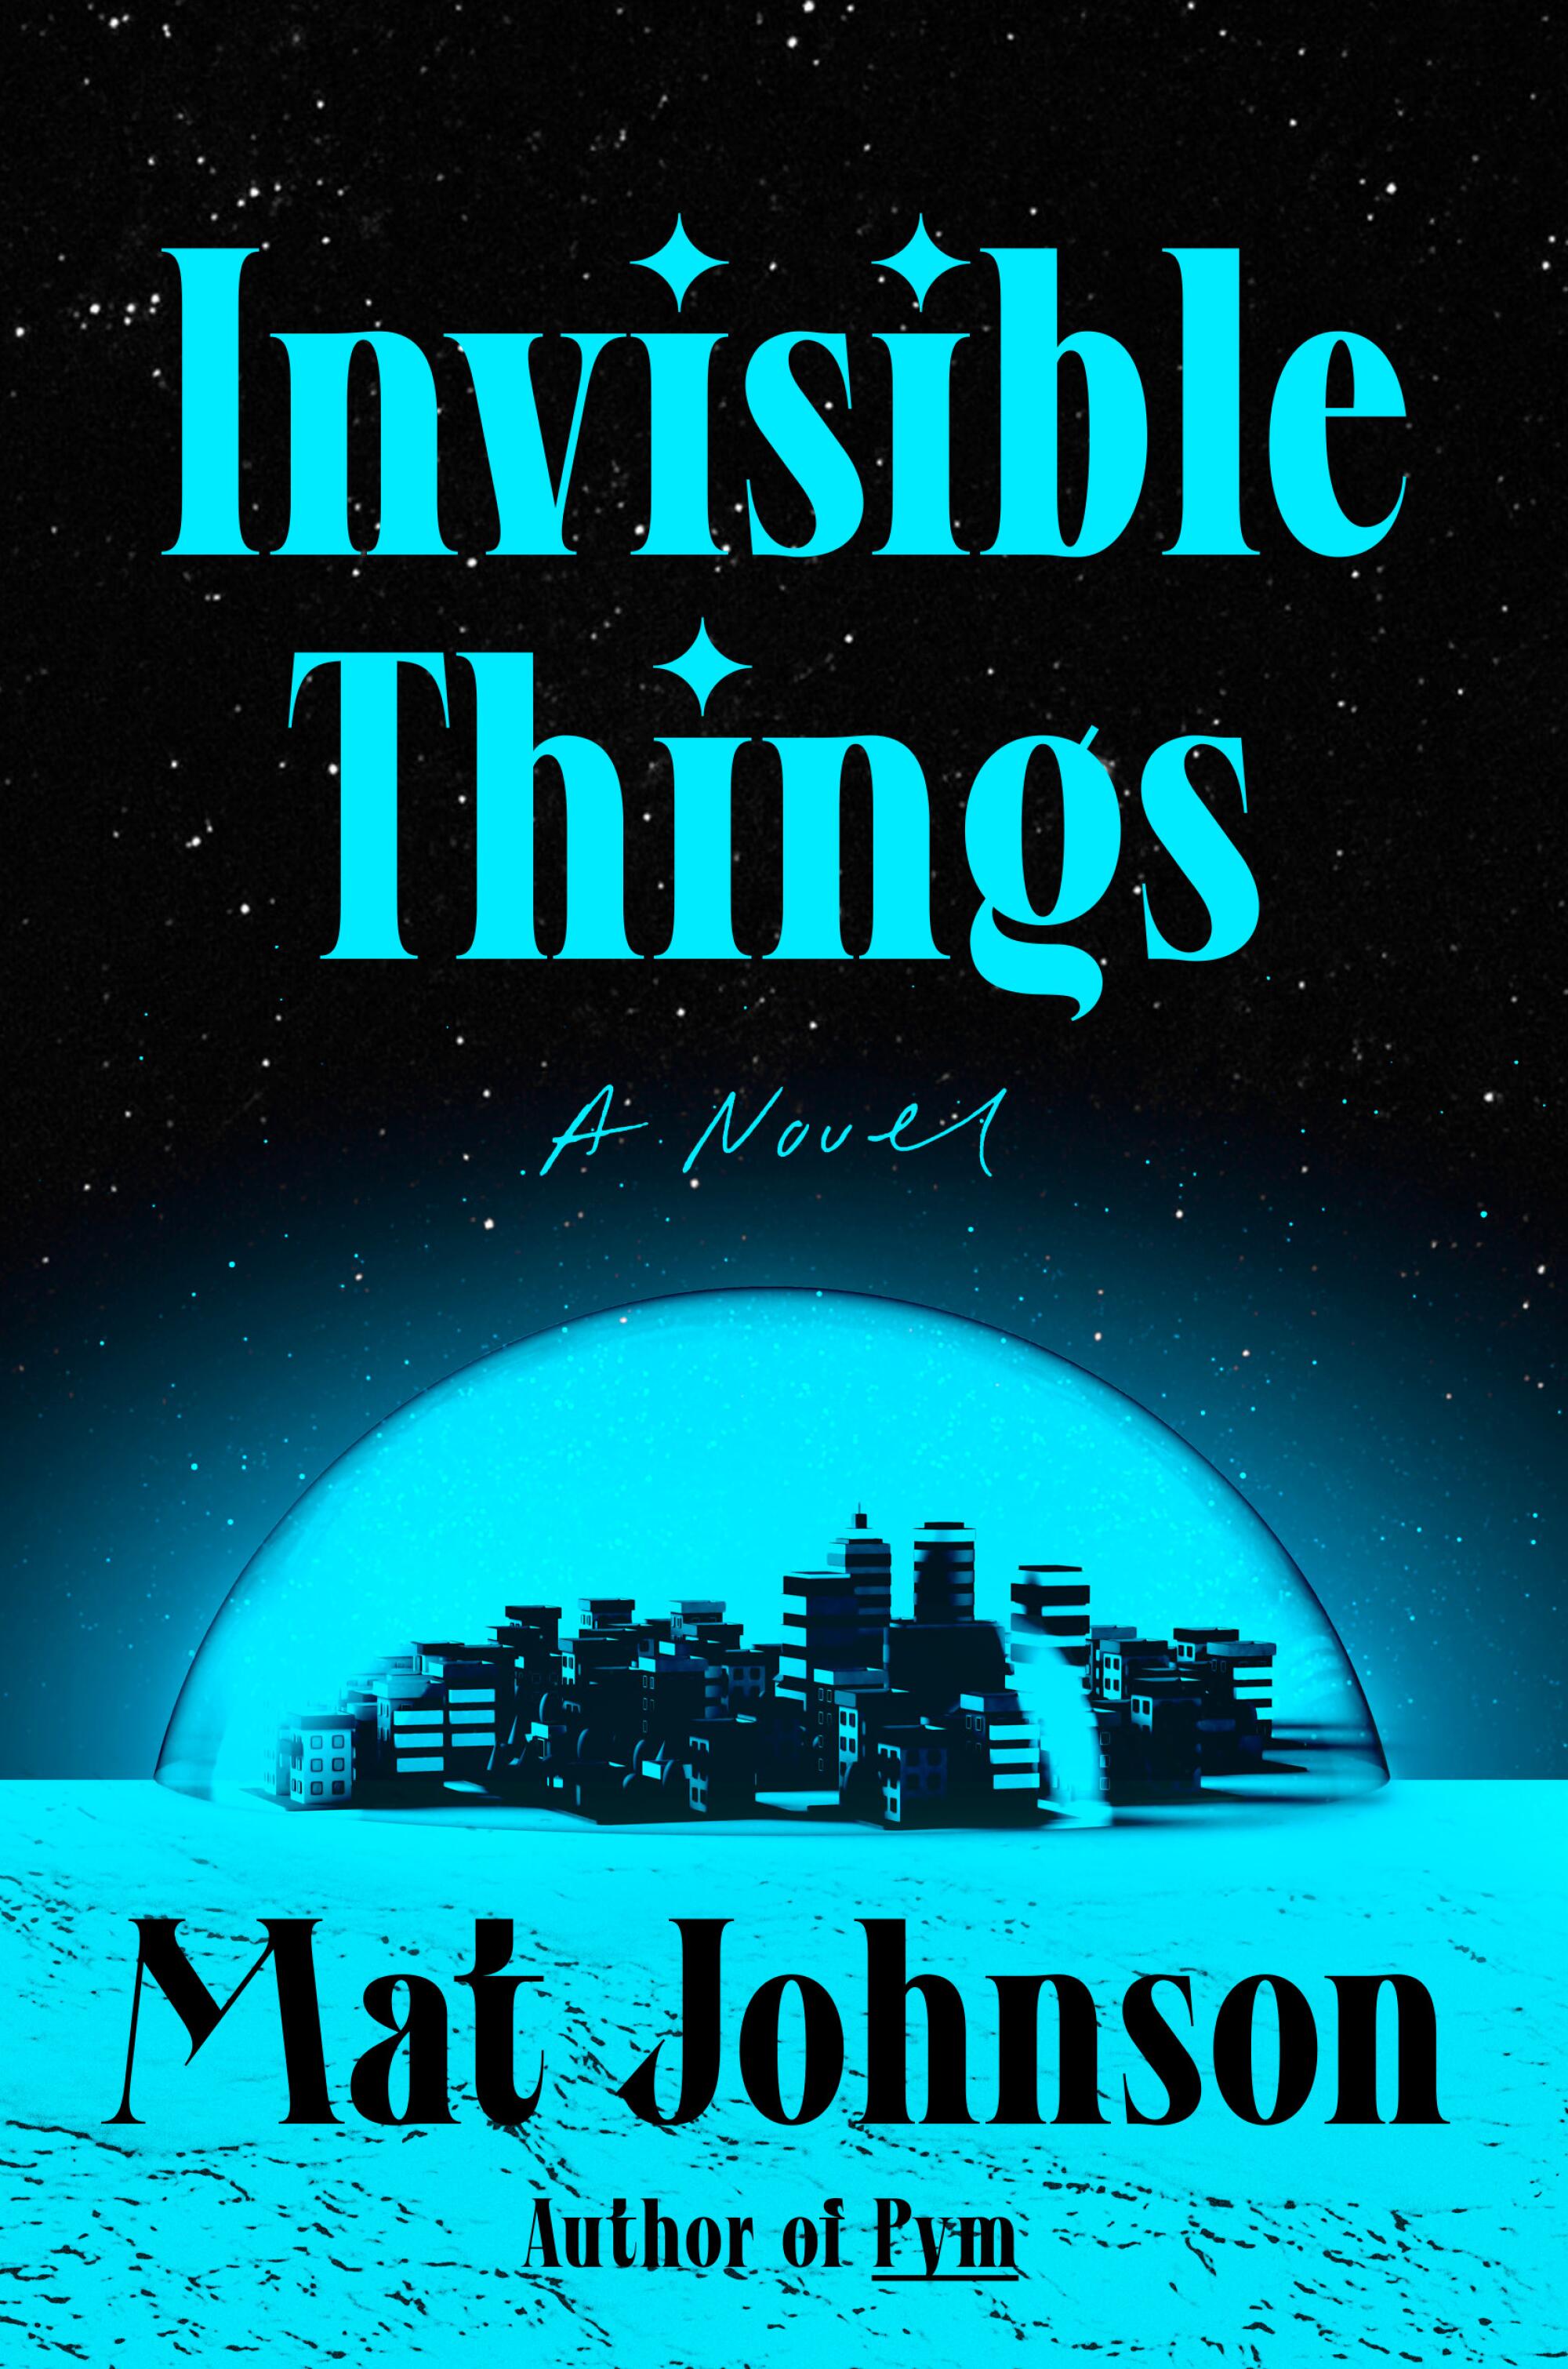 The cover of the novel "Invisible Things" 